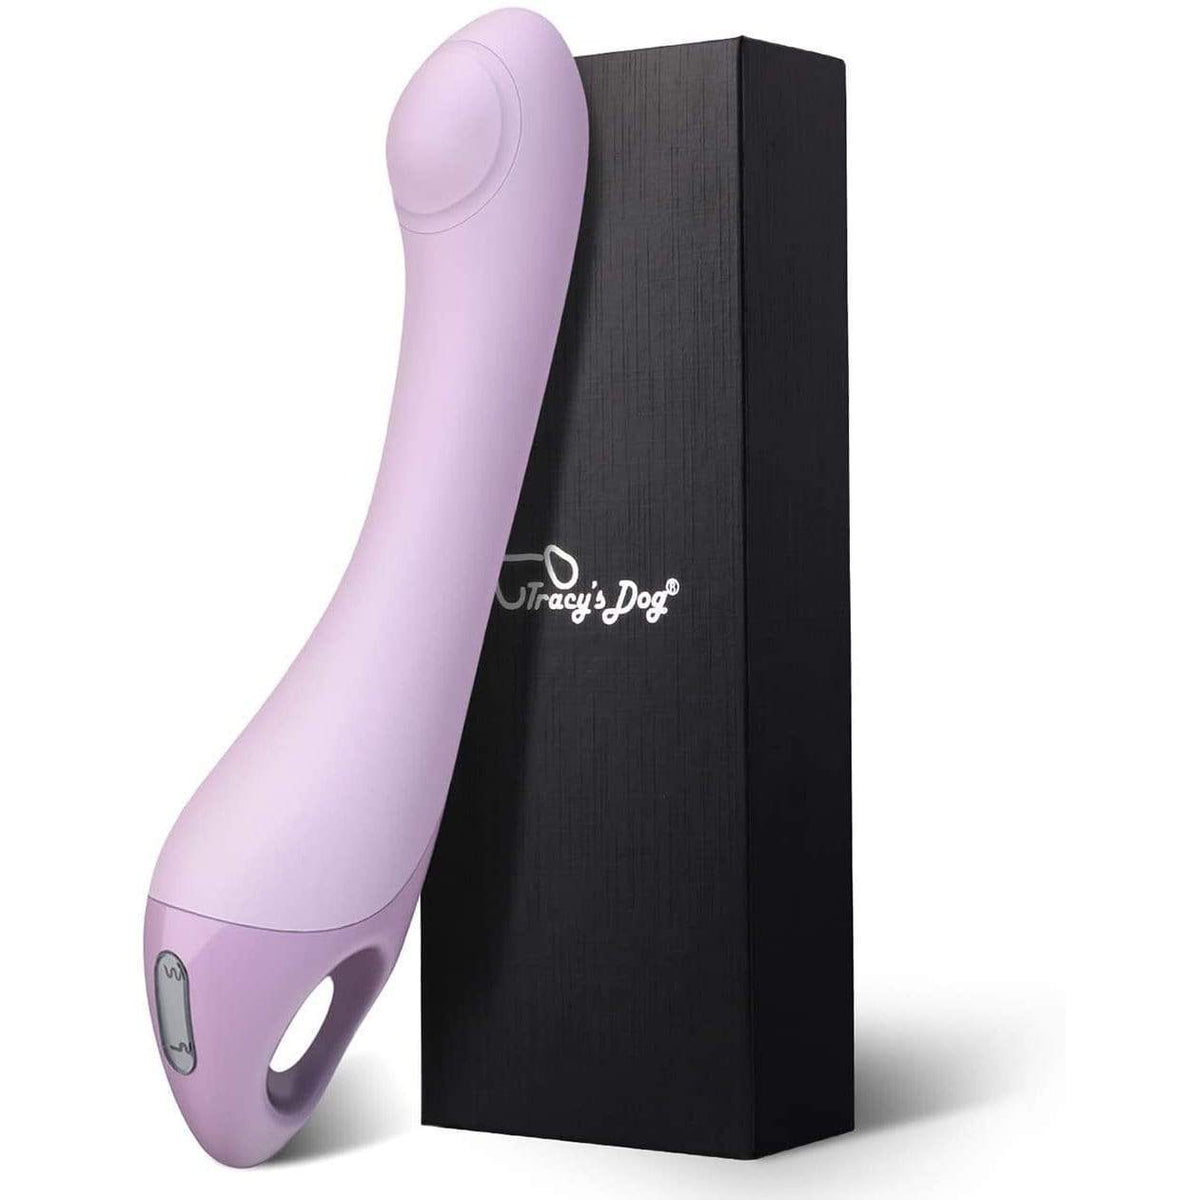 Tracy&#39;s Dog - Rechargeable G Spot Vibrator Pulsator (Purple) G Spot Dildo (Vibration) Rechargeable 293492891 CherryAffairs